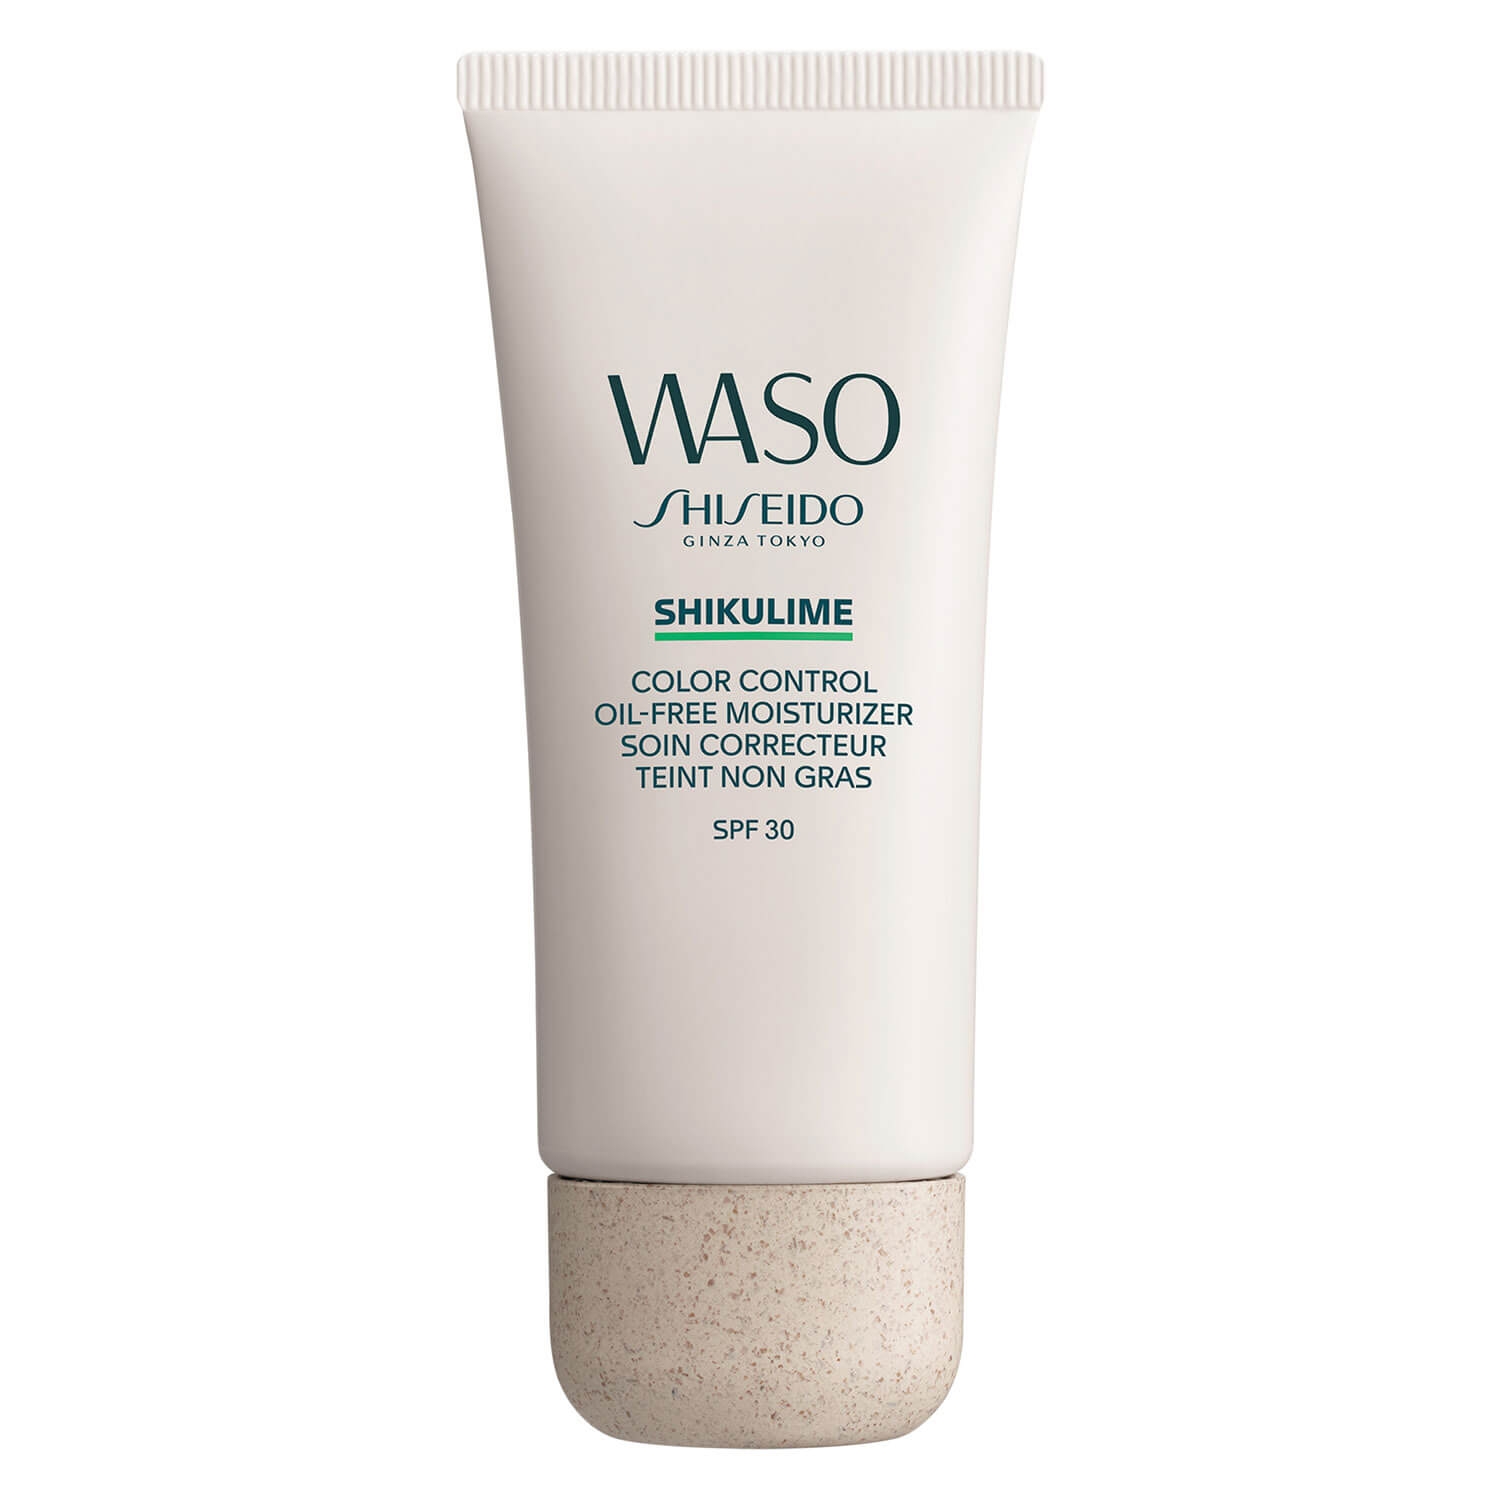 Product image from Waso - Shikulime Color Control Oil-Free Moisturizer